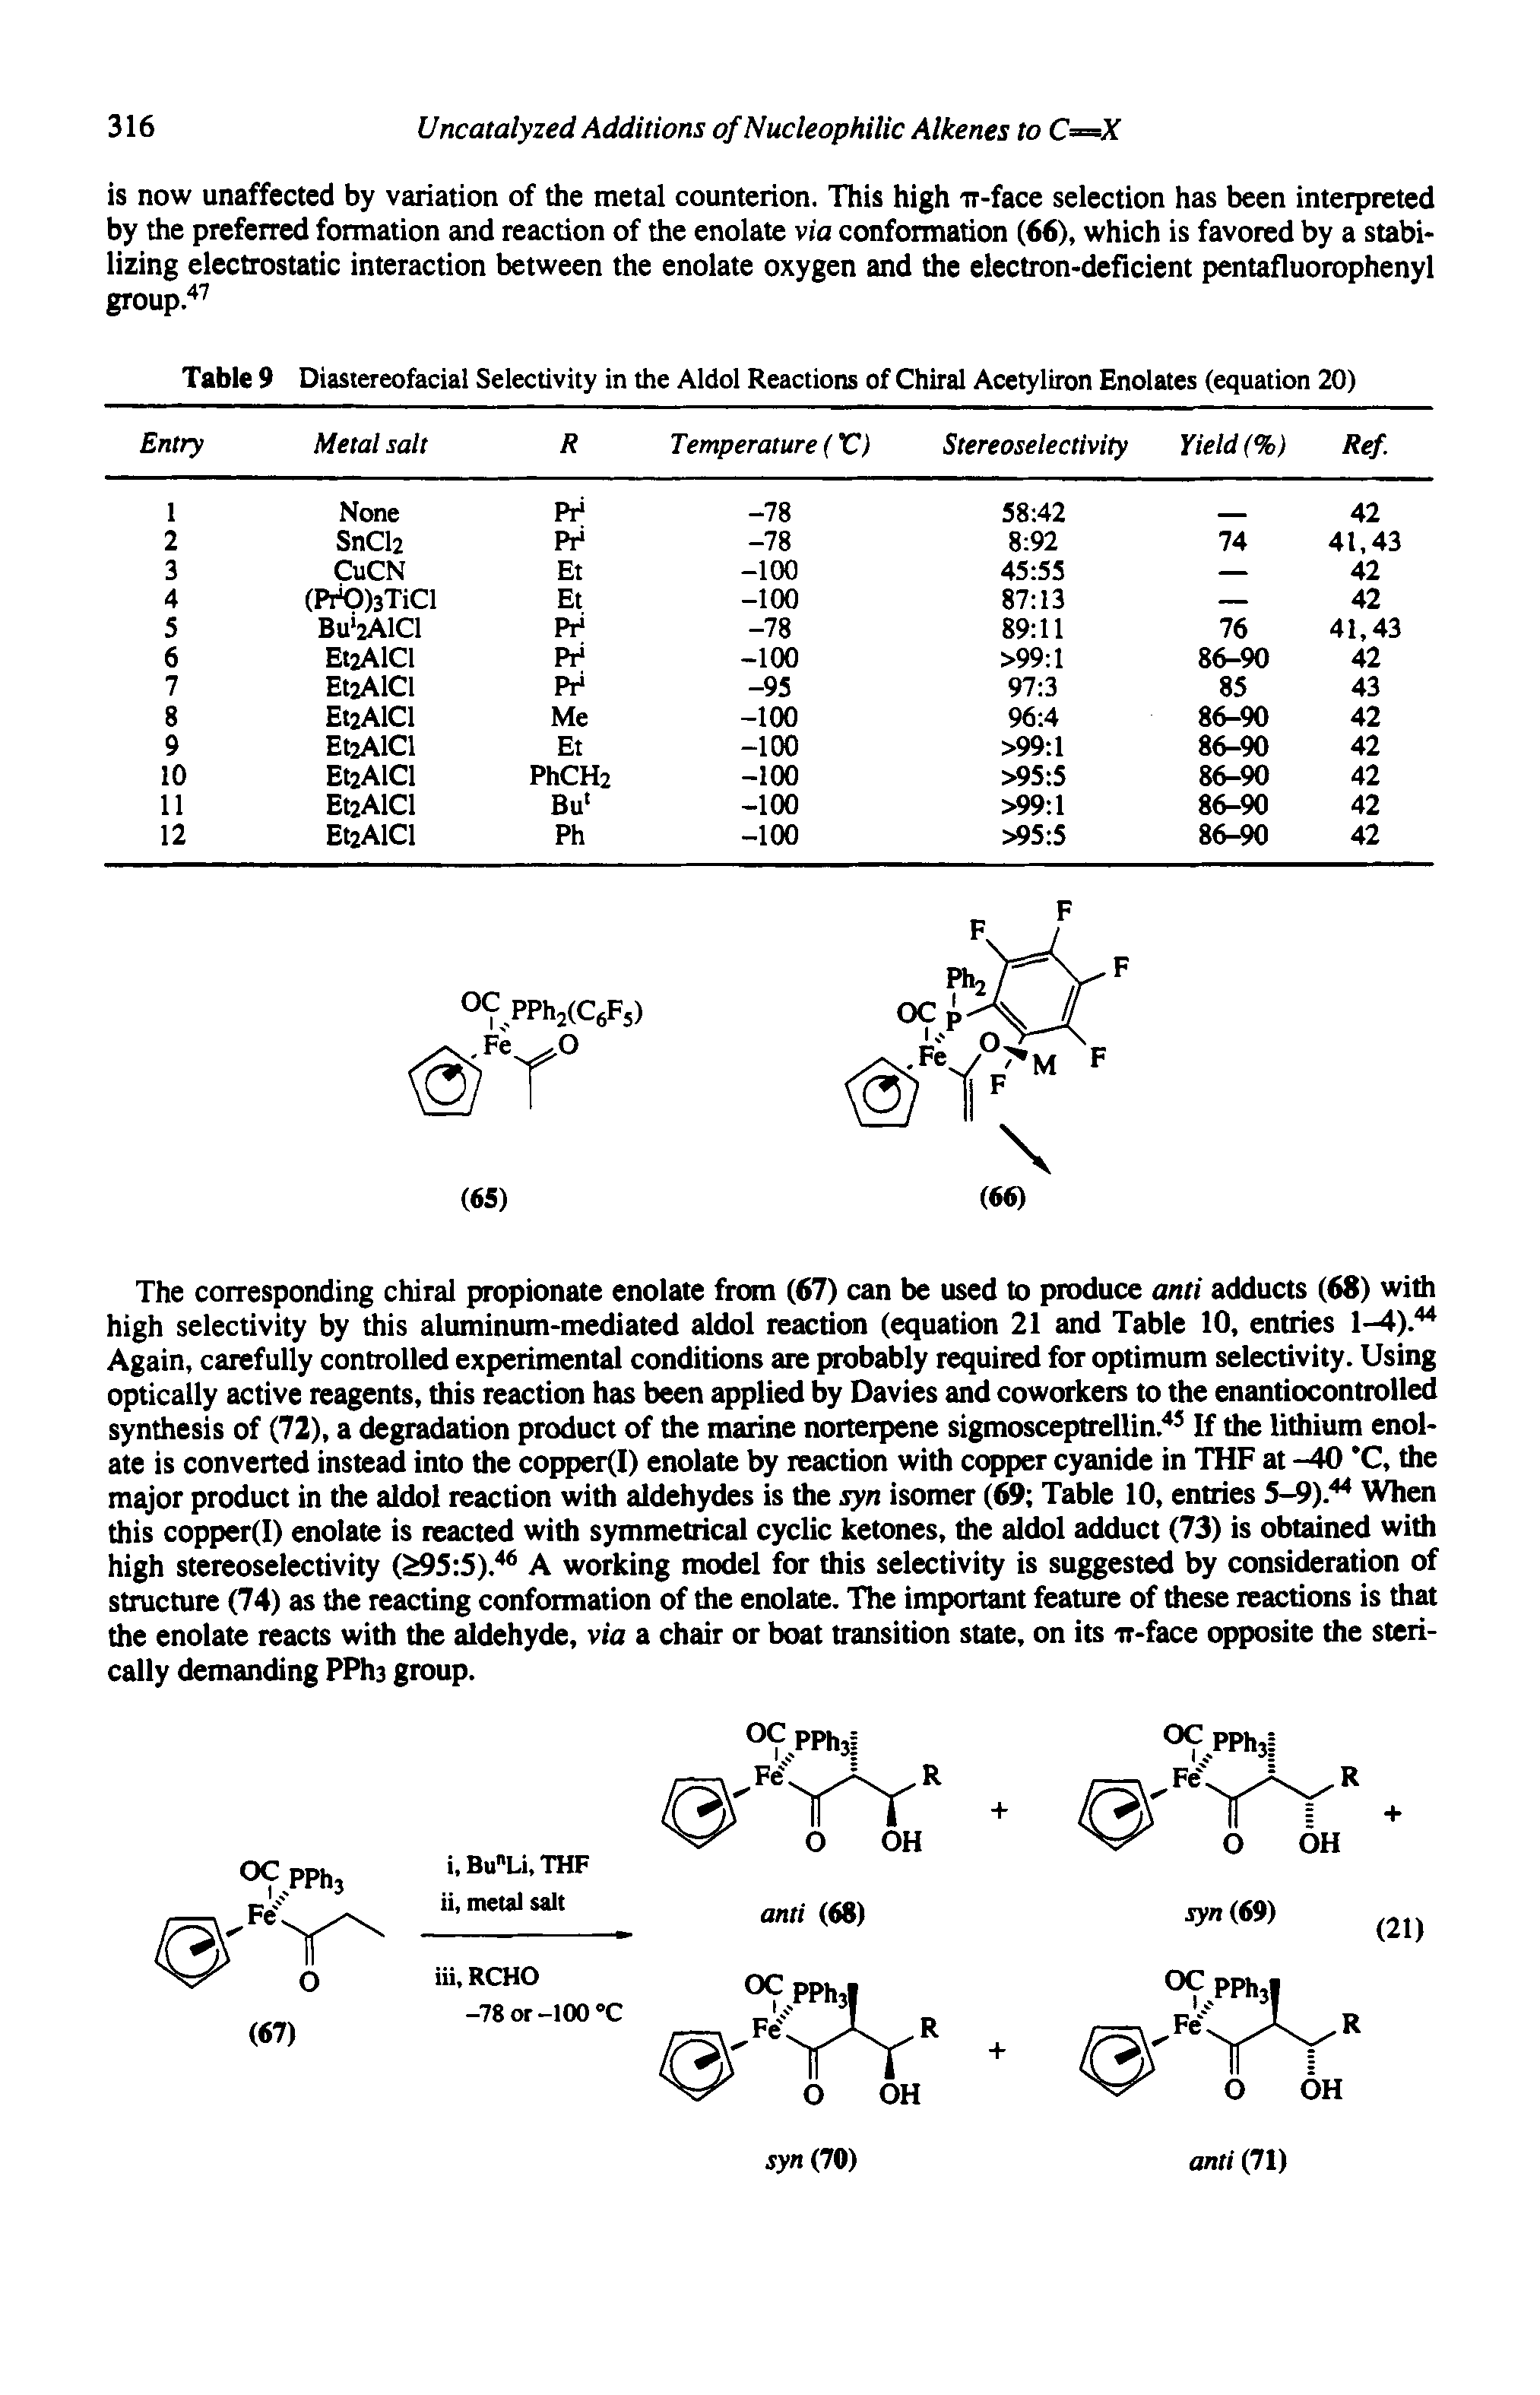 Table 9 Diastereofacial Selectivity in the Aldol Reactions of Chiral Acetyliron Enolates (equation 20)...